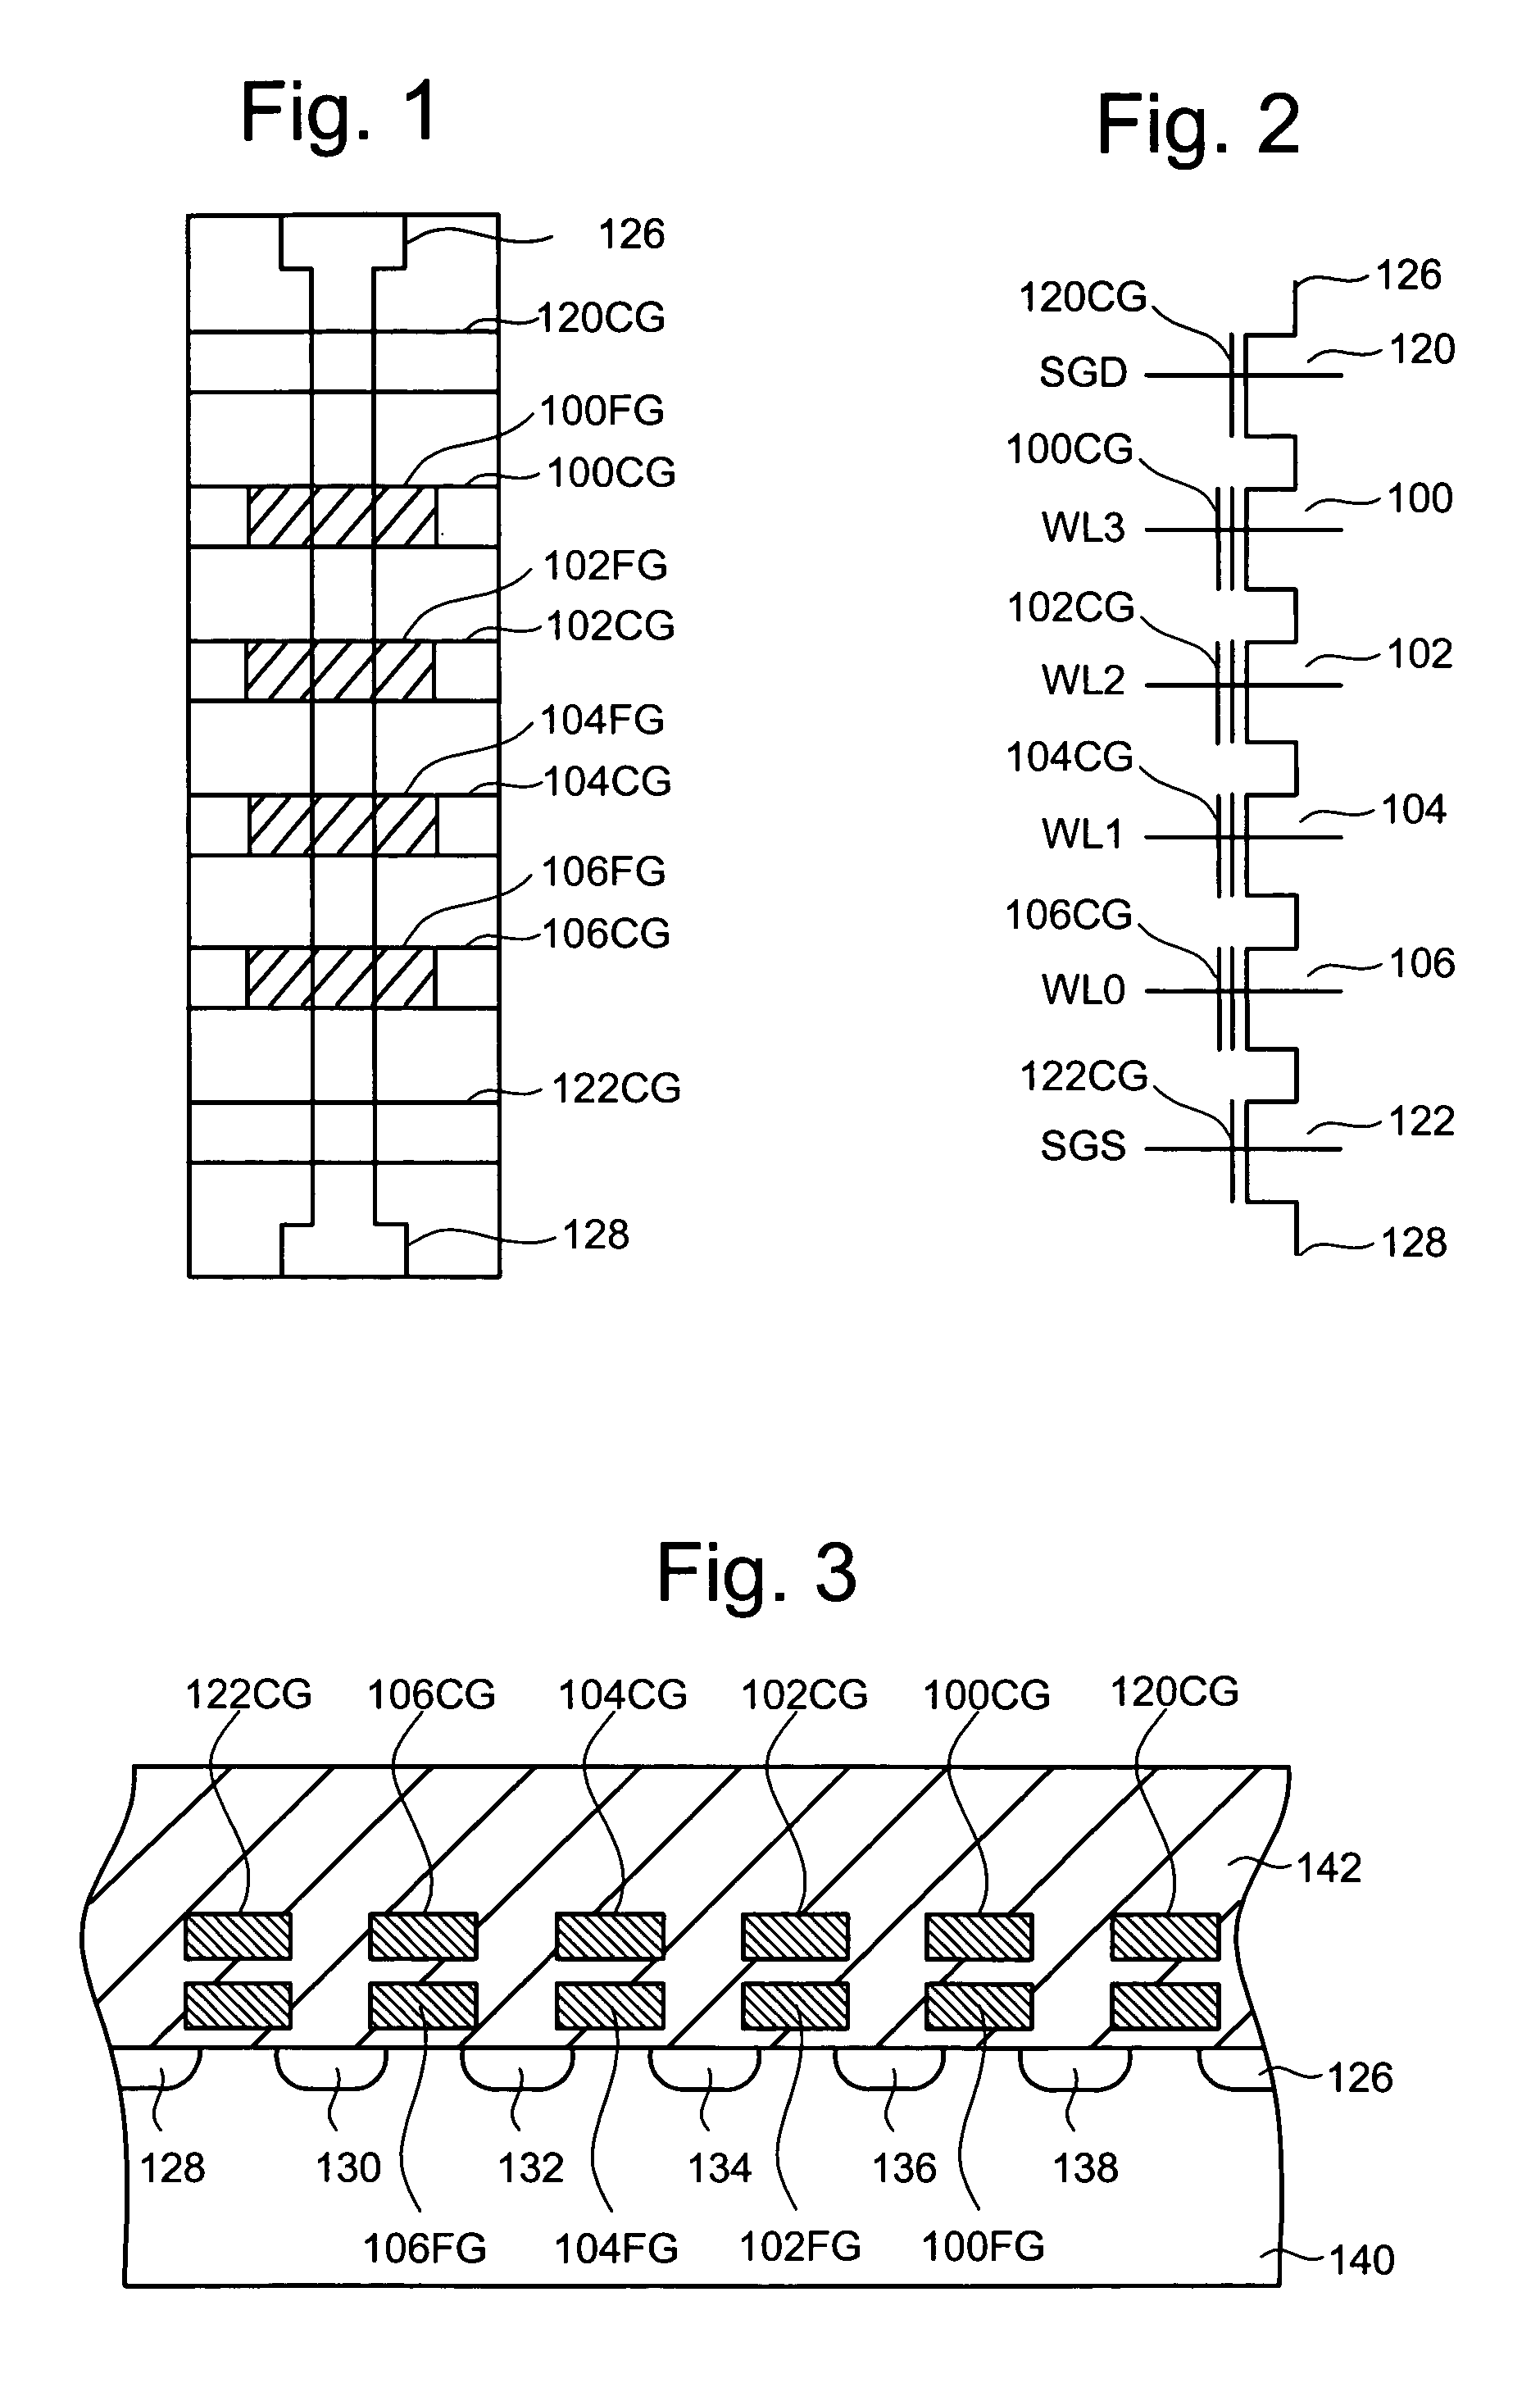 Operating non-volatile memory without read disturb limitations